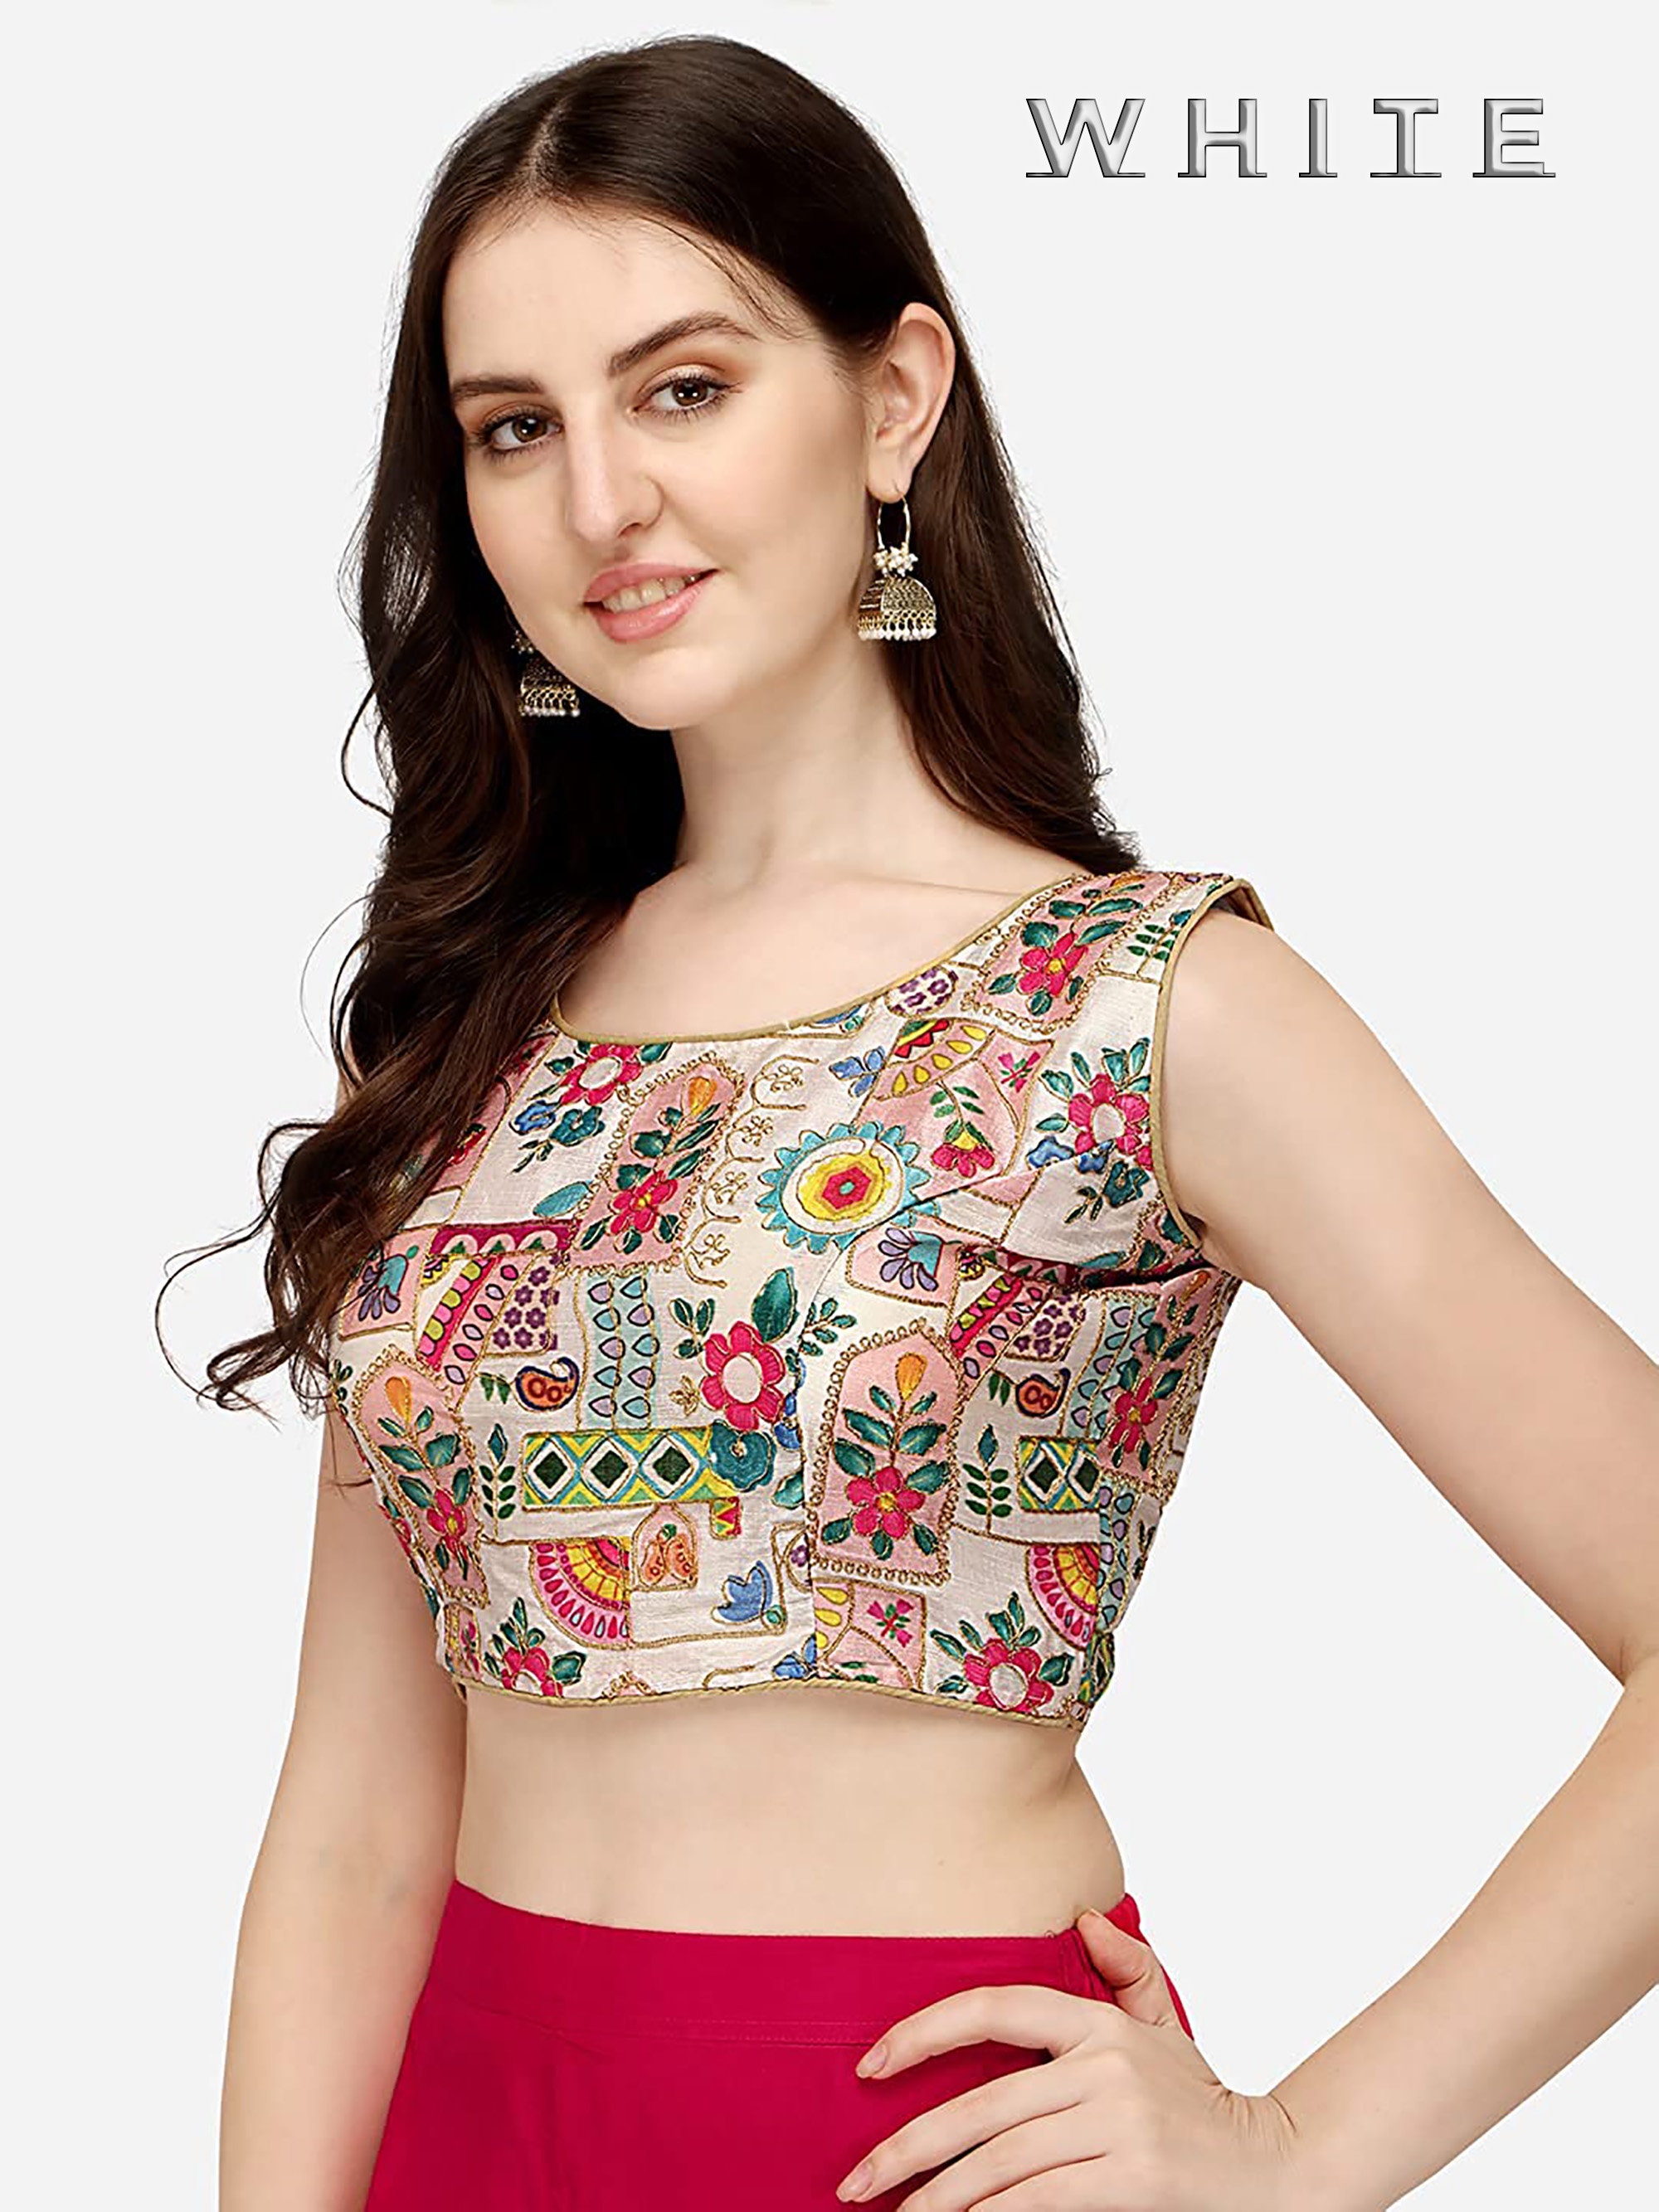 Buy Susan Floral Blouse for Women Online in India